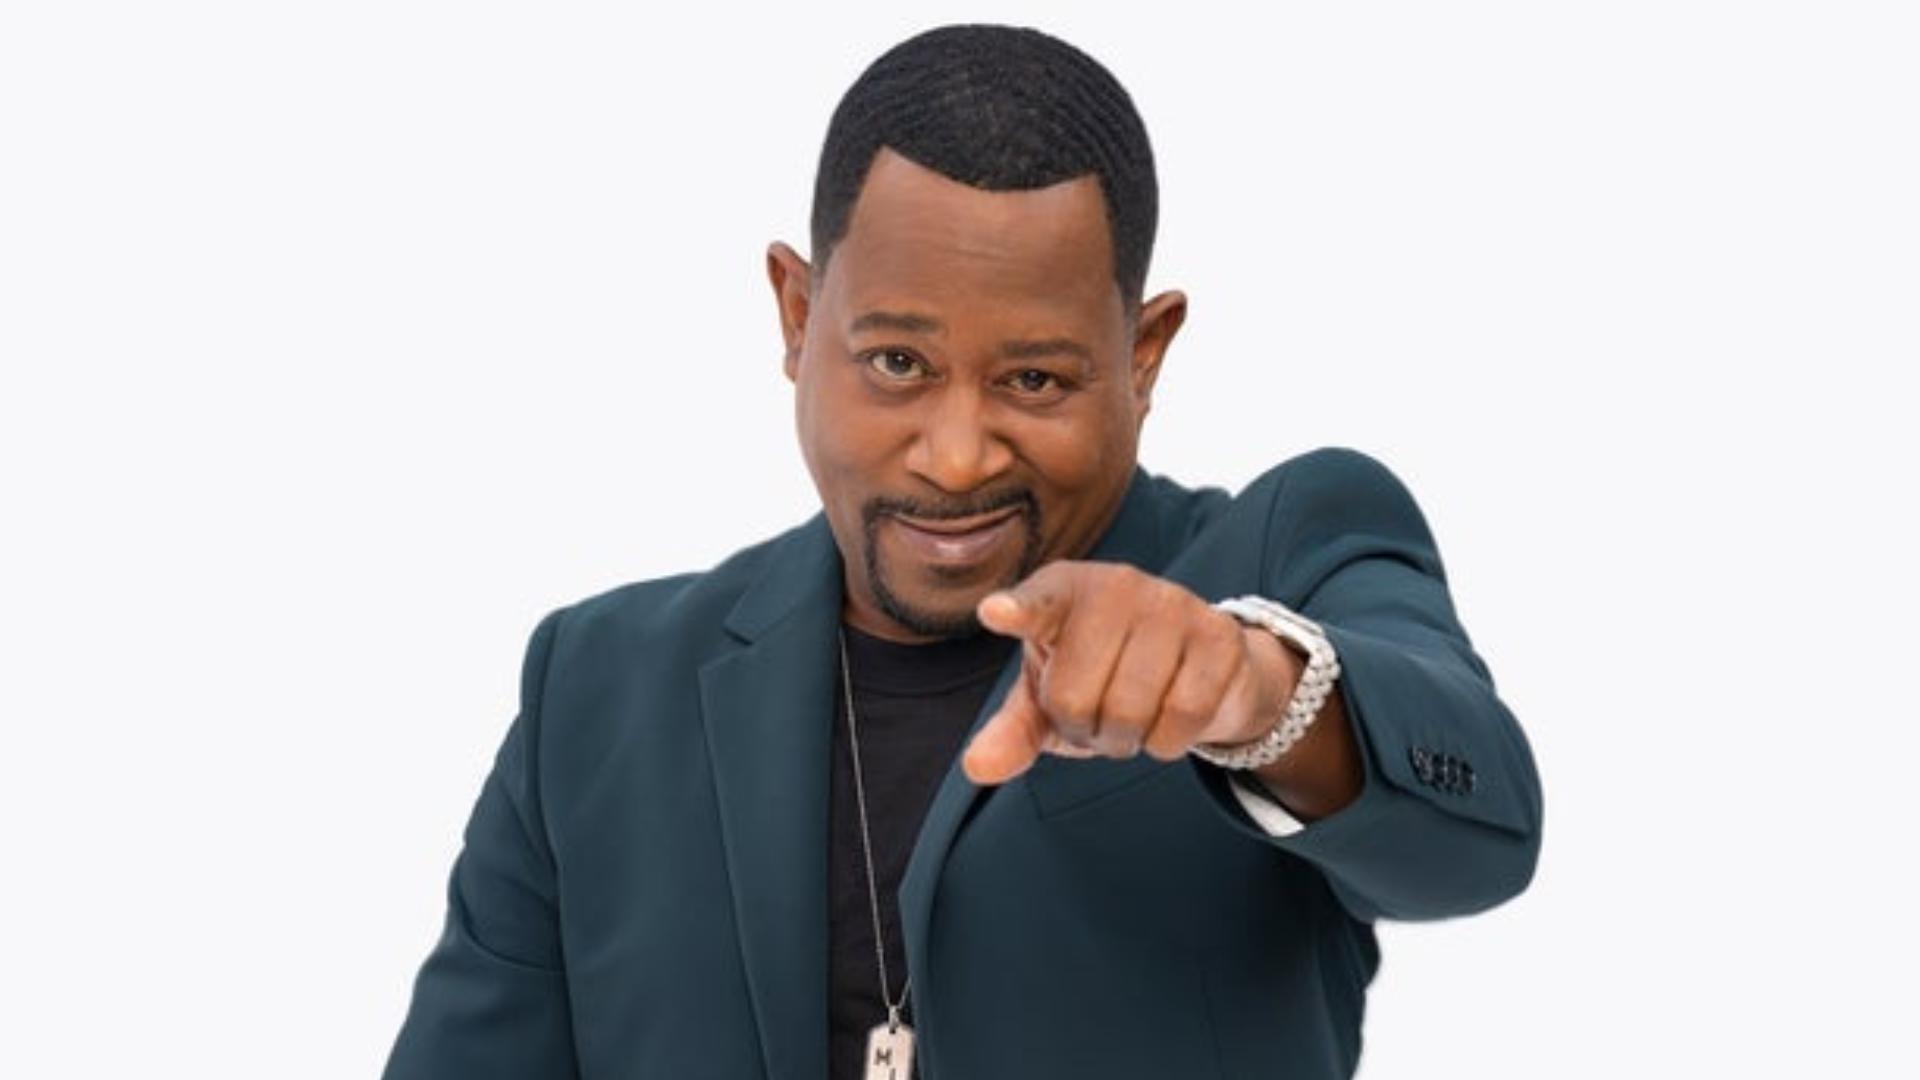 The star comedian will be at the mic at VyStar Veterans Memorial Arena on Dec. 13; tickets for the show go on sale Friday.